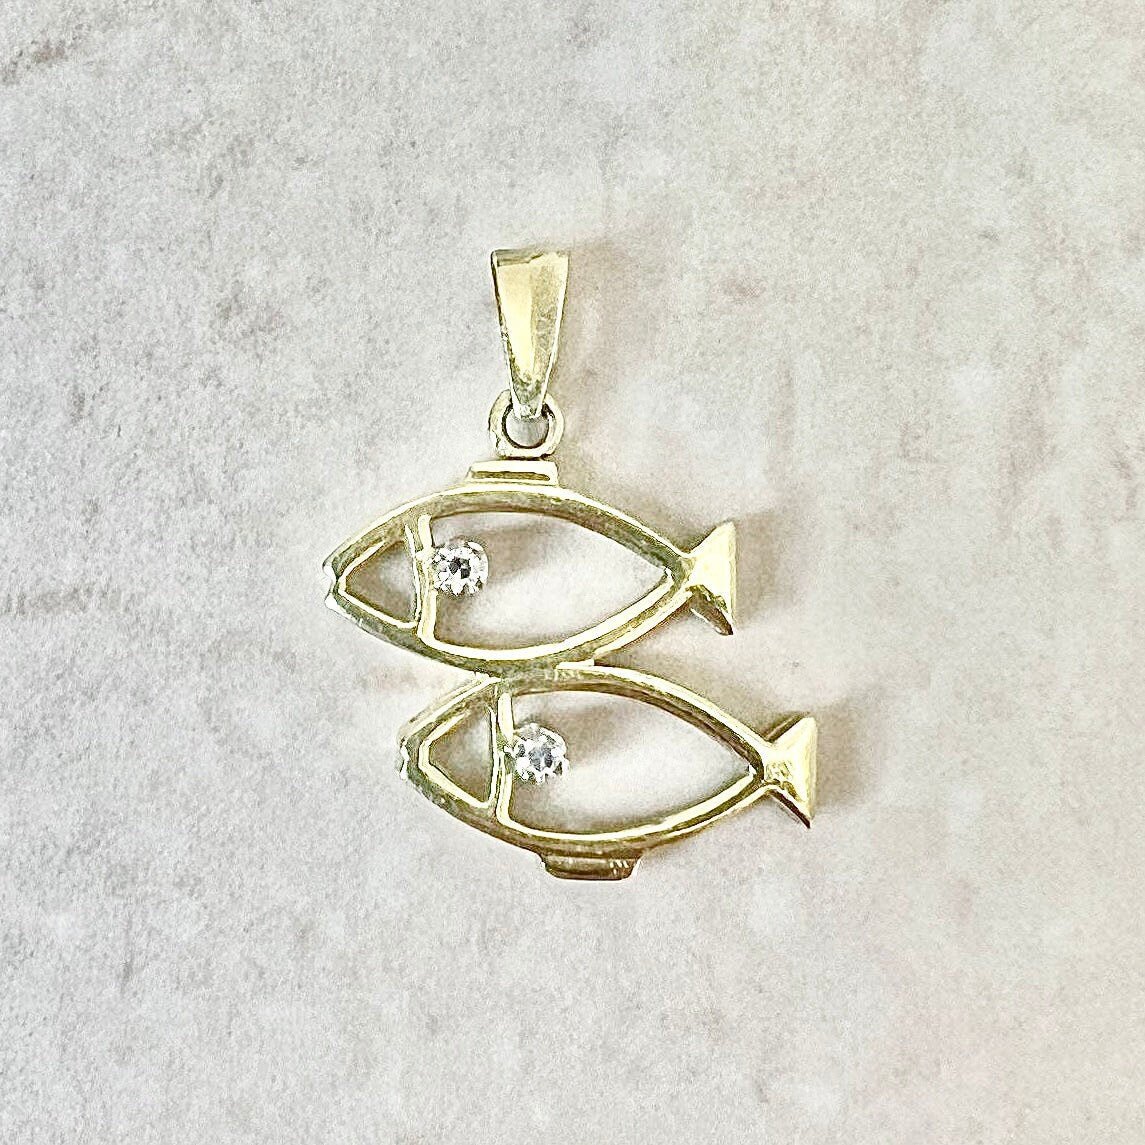 Vintage Italian 18K Yellow Gold Diamond Fish Pendant Necklace - Diamond Pendant - Pisces Pendant - Diamond Necklace - Birthday Gift For Her